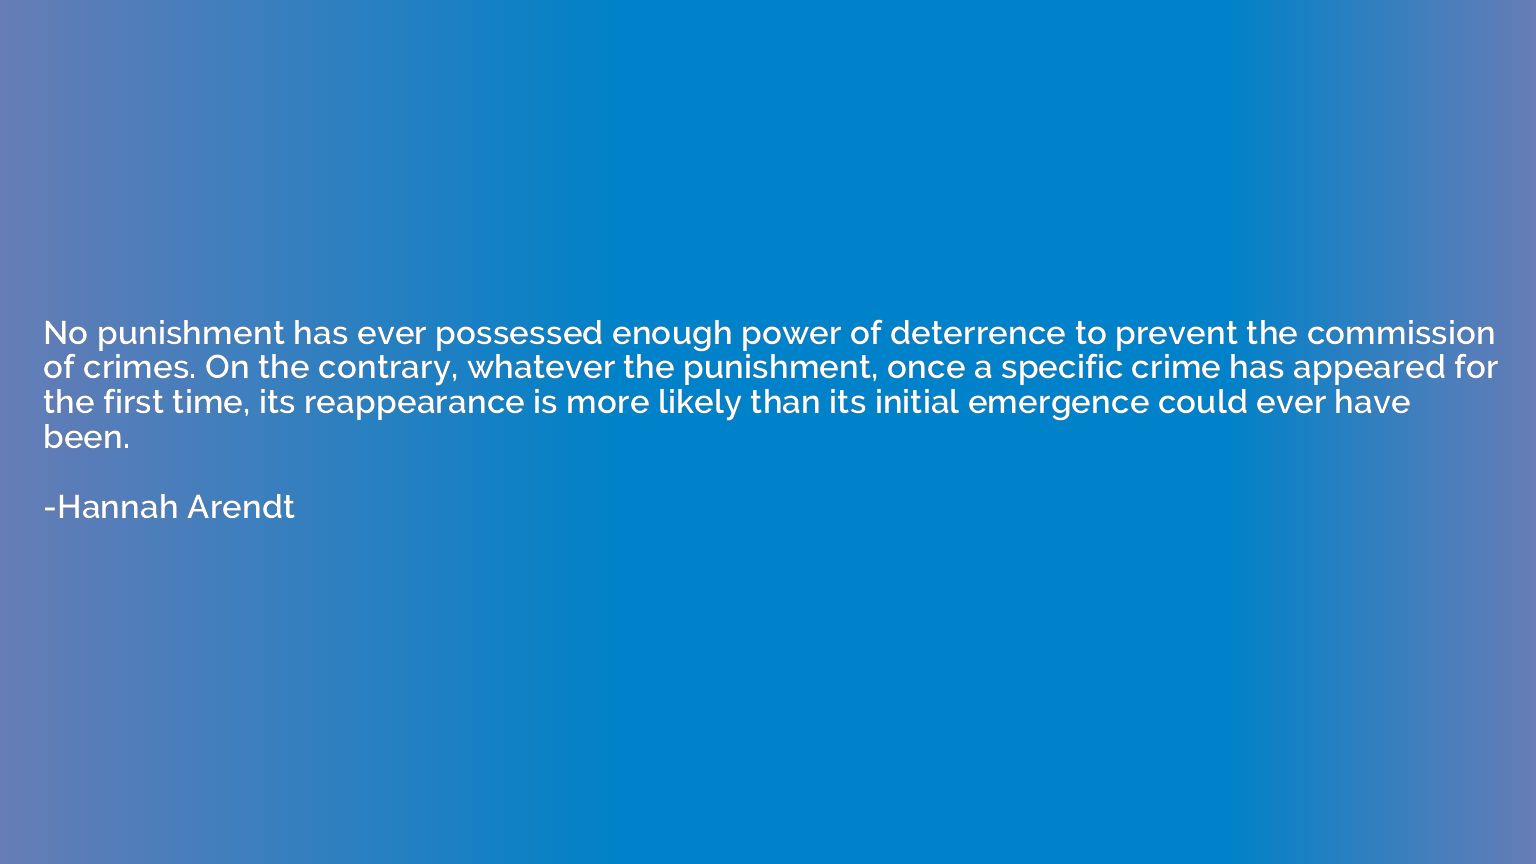 No punishment has ever possessed enough power of deterrence 